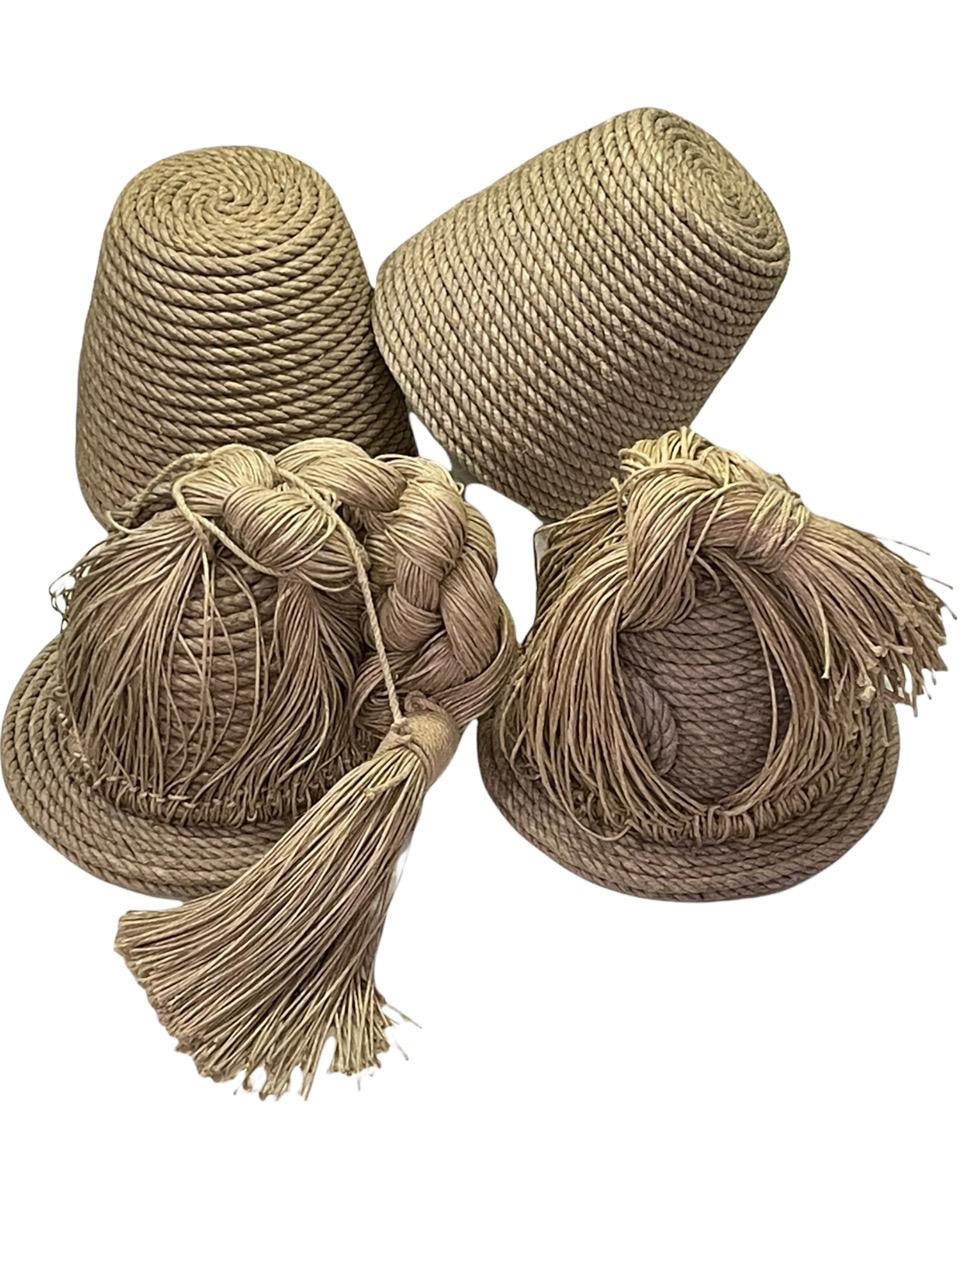 Pair of Contemporary 21st Century French Christian Astuguevieille Jute Rope Co For Sale 9